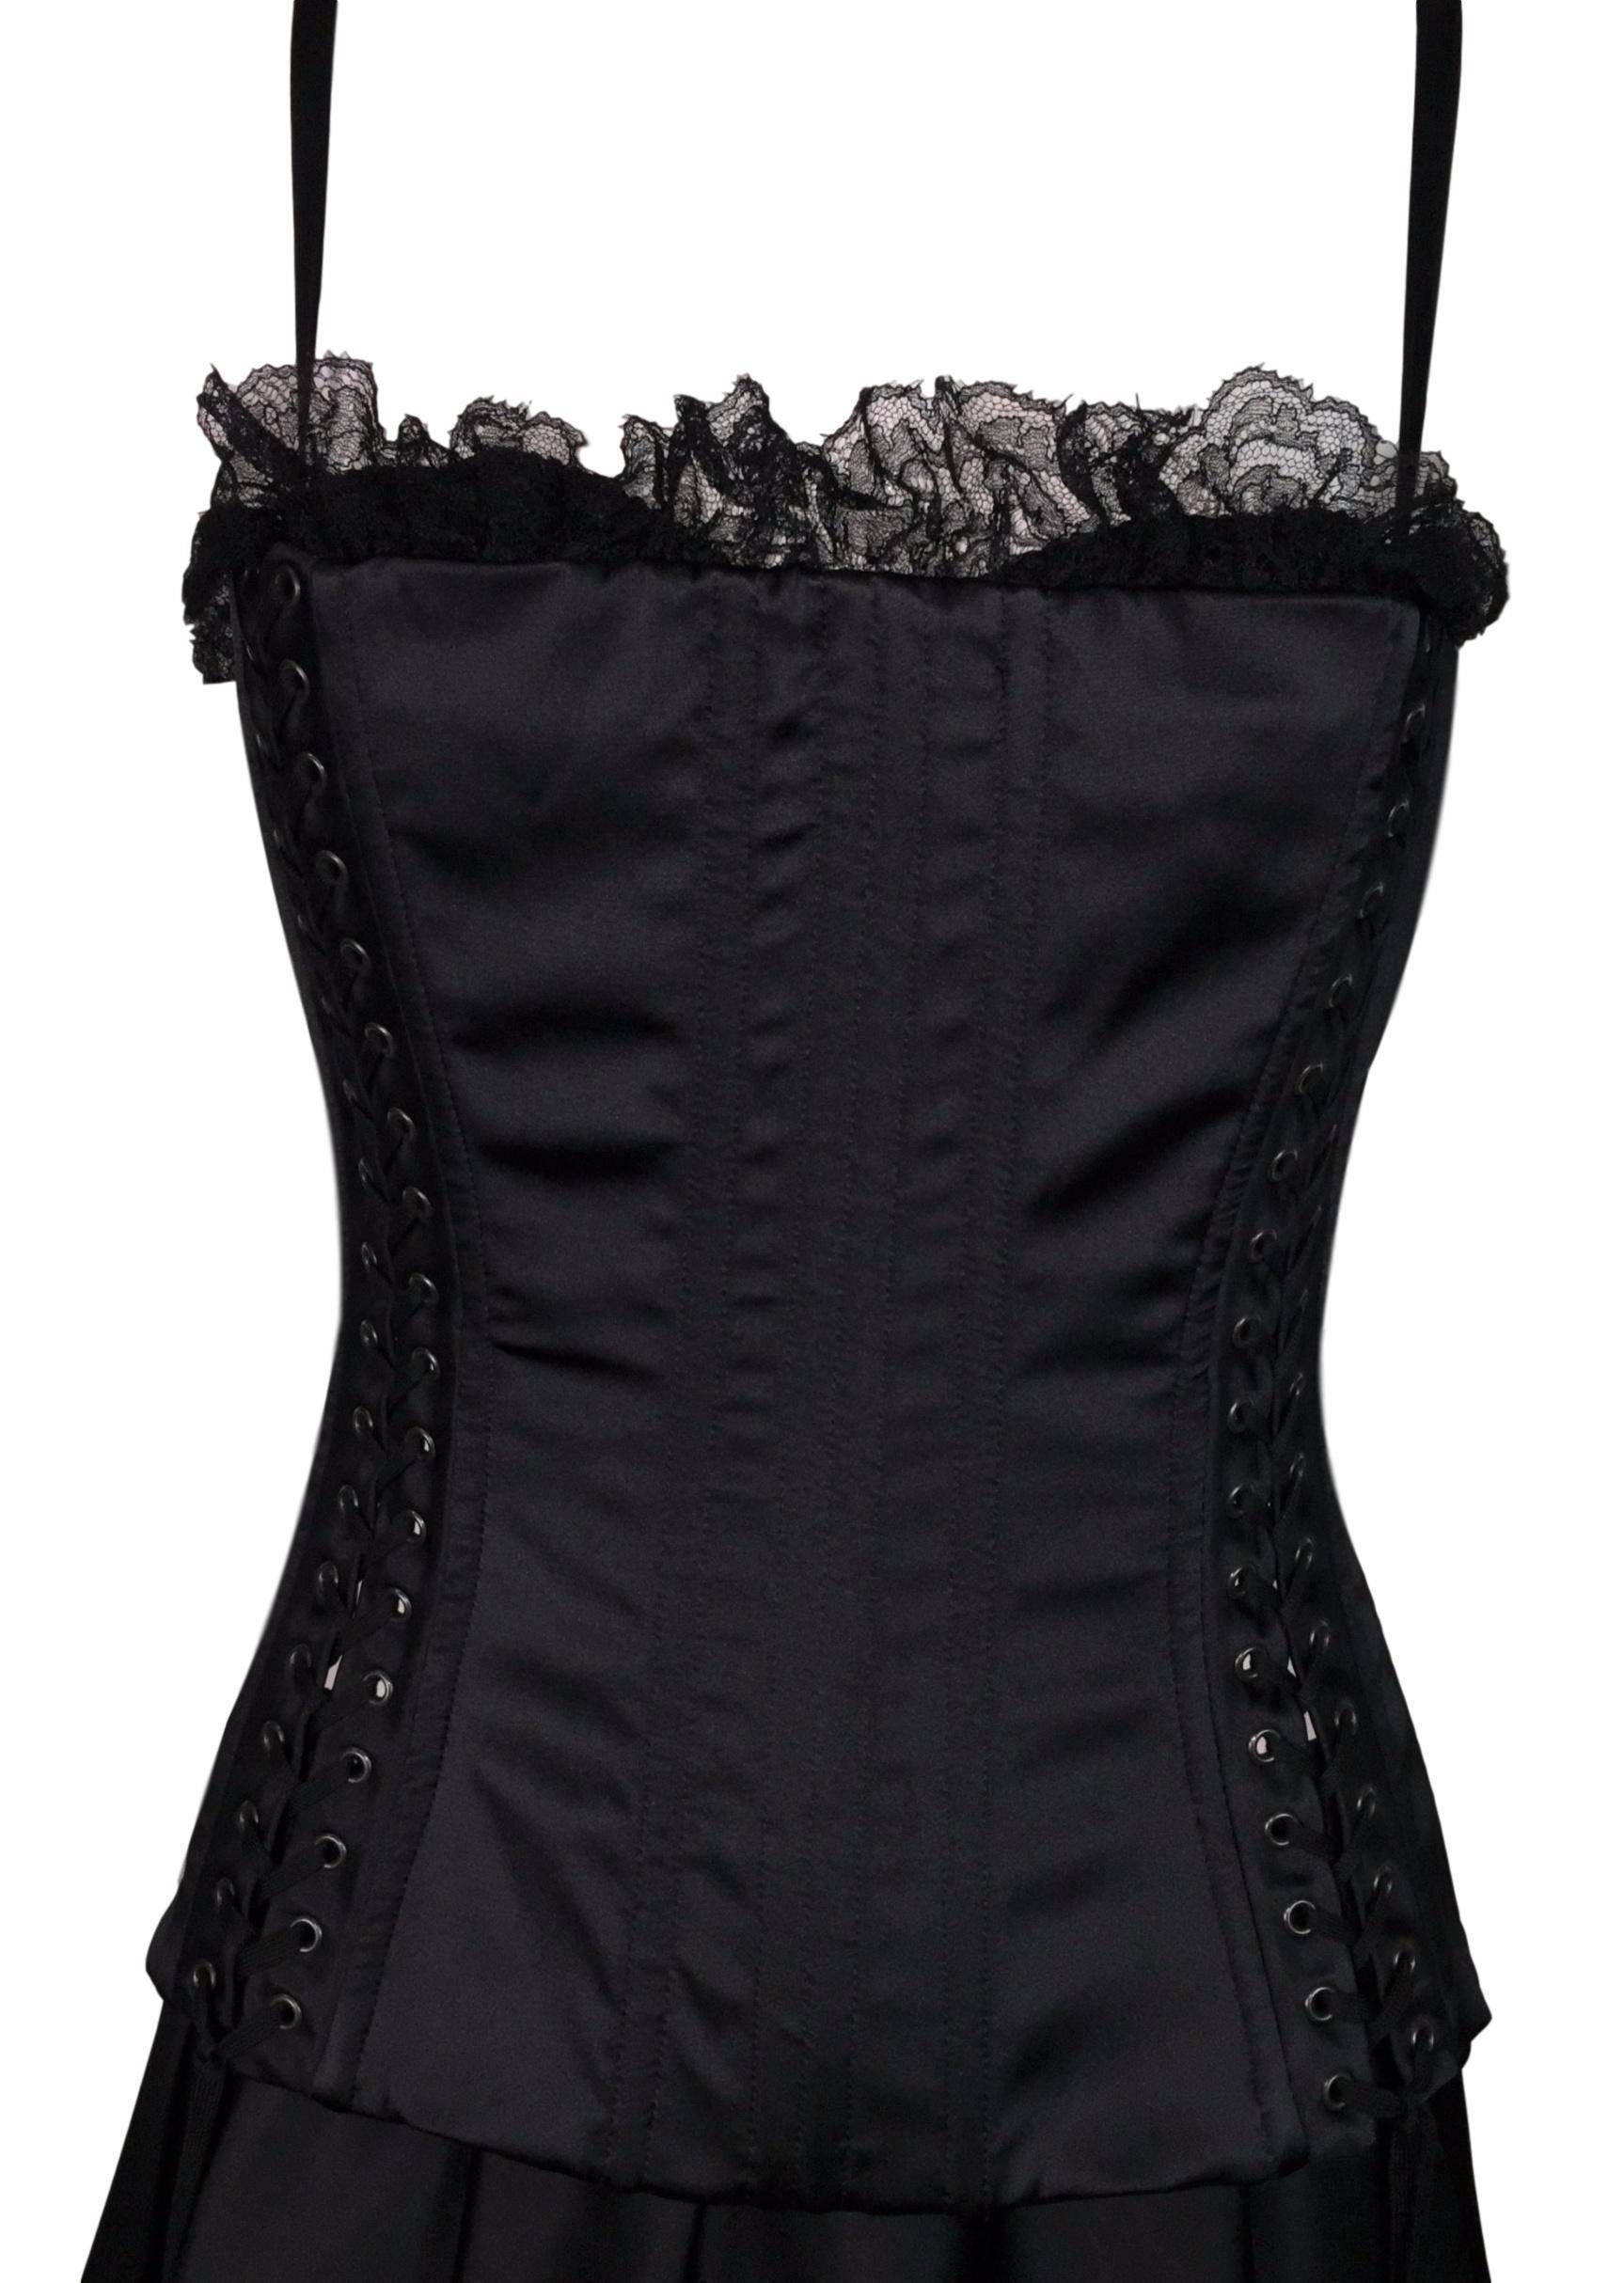 DESIGNER: F/W 2003 Dolce & Gabbana- has an attached bra with a B cup but the bra can be detached and the dress worn as a strapless corset dress and it will accommodate larger bust sizes. 

Please contact for more information and/or